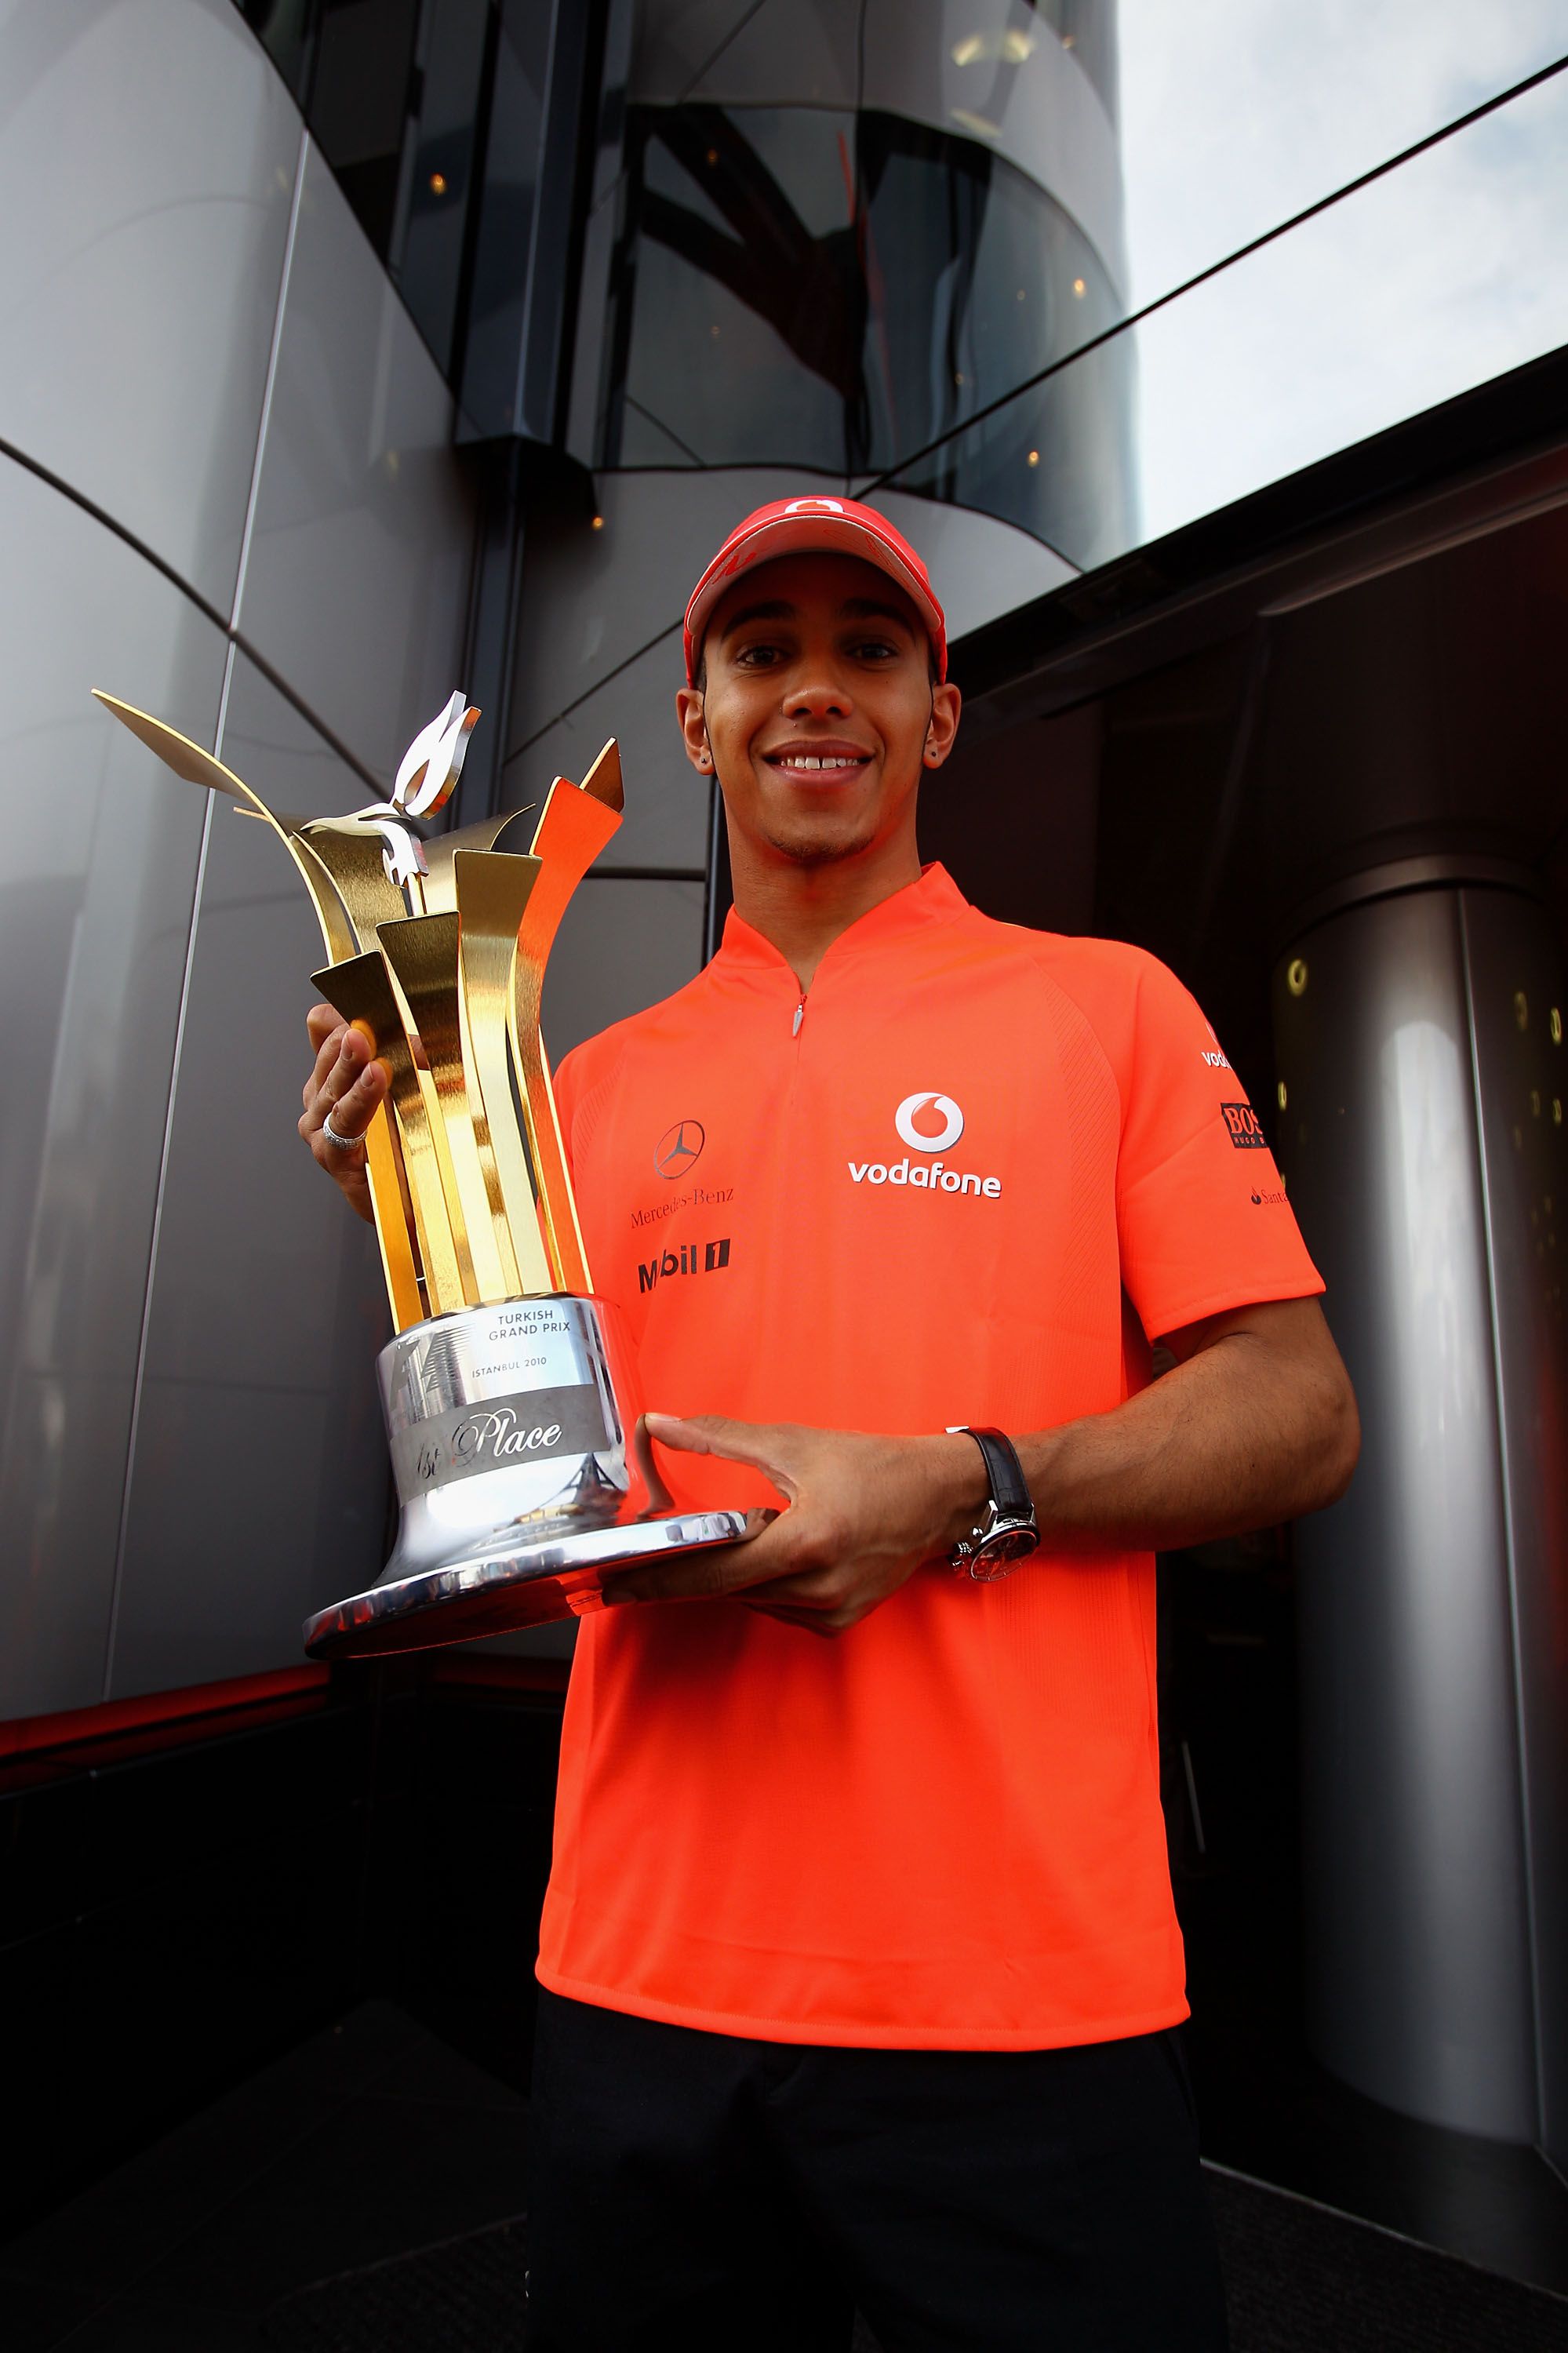 Here's why F1 trophies are hilariously crap